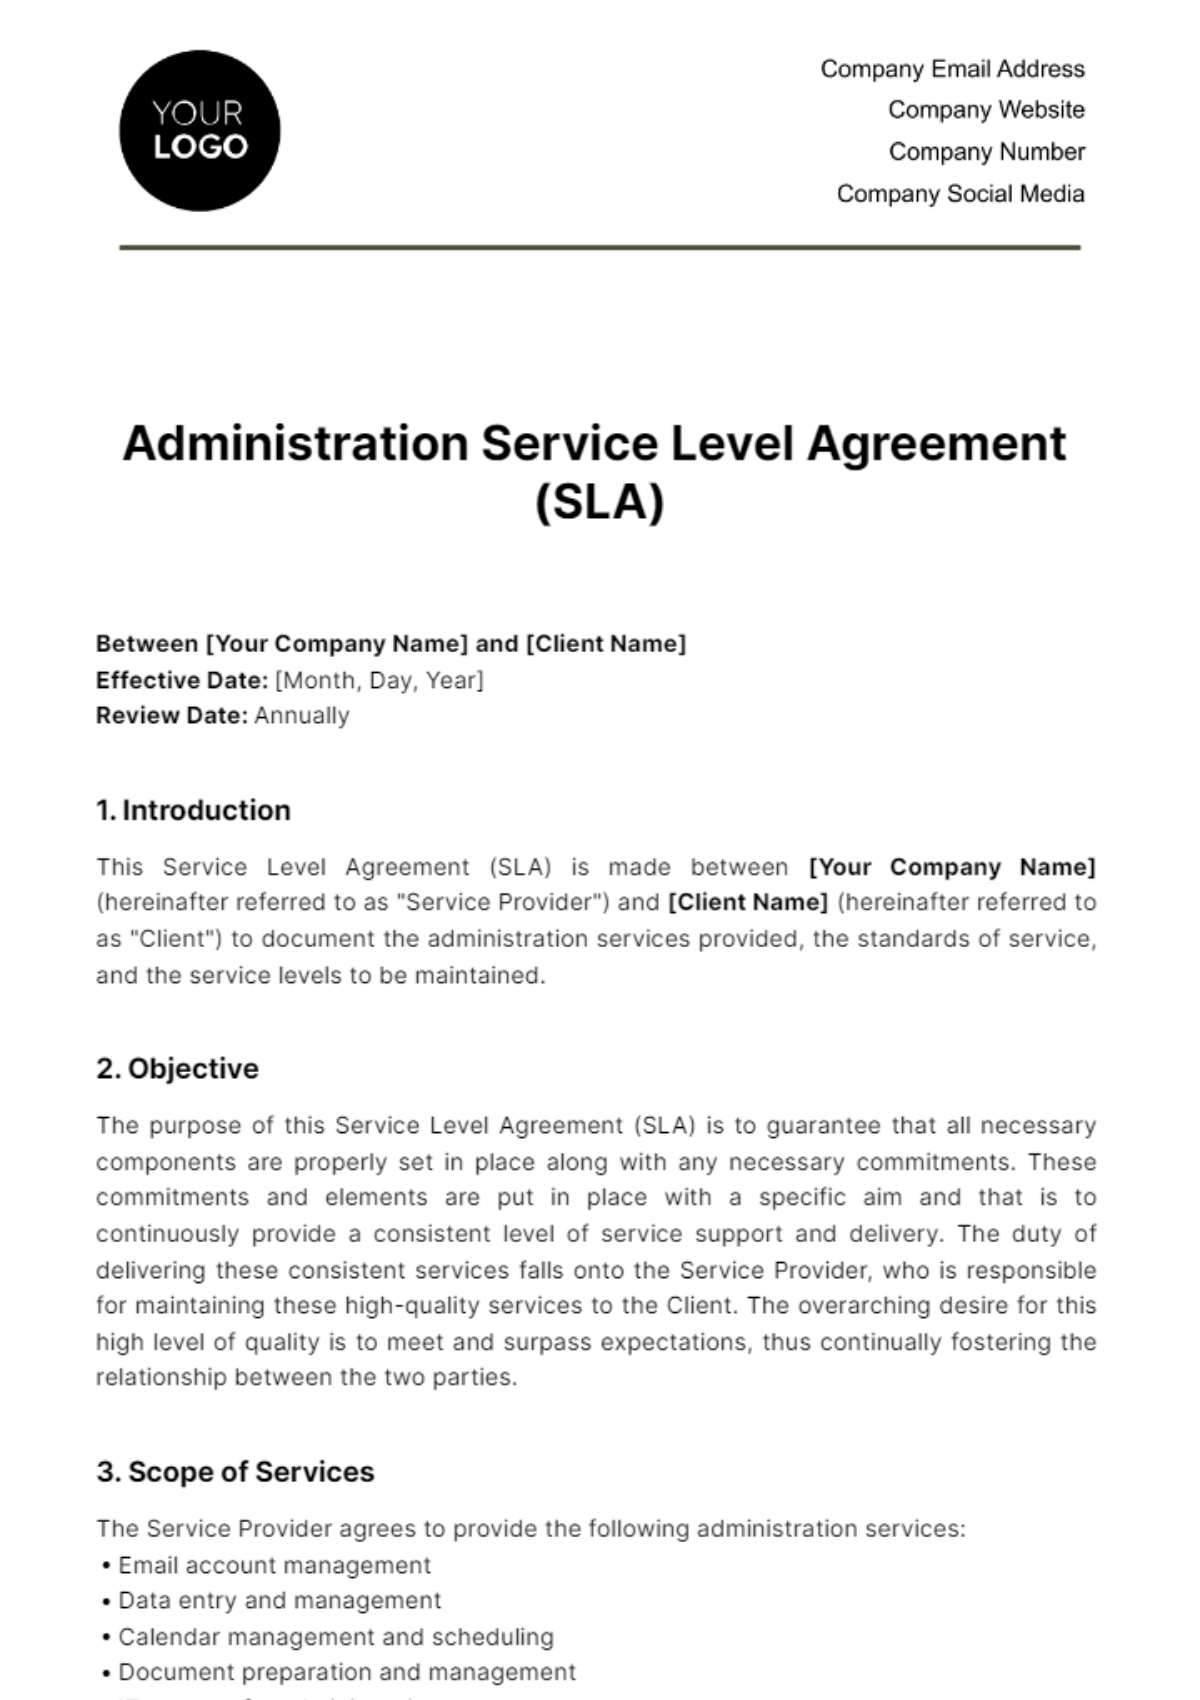 Free Administration Service Level Agreement (SLA) Template